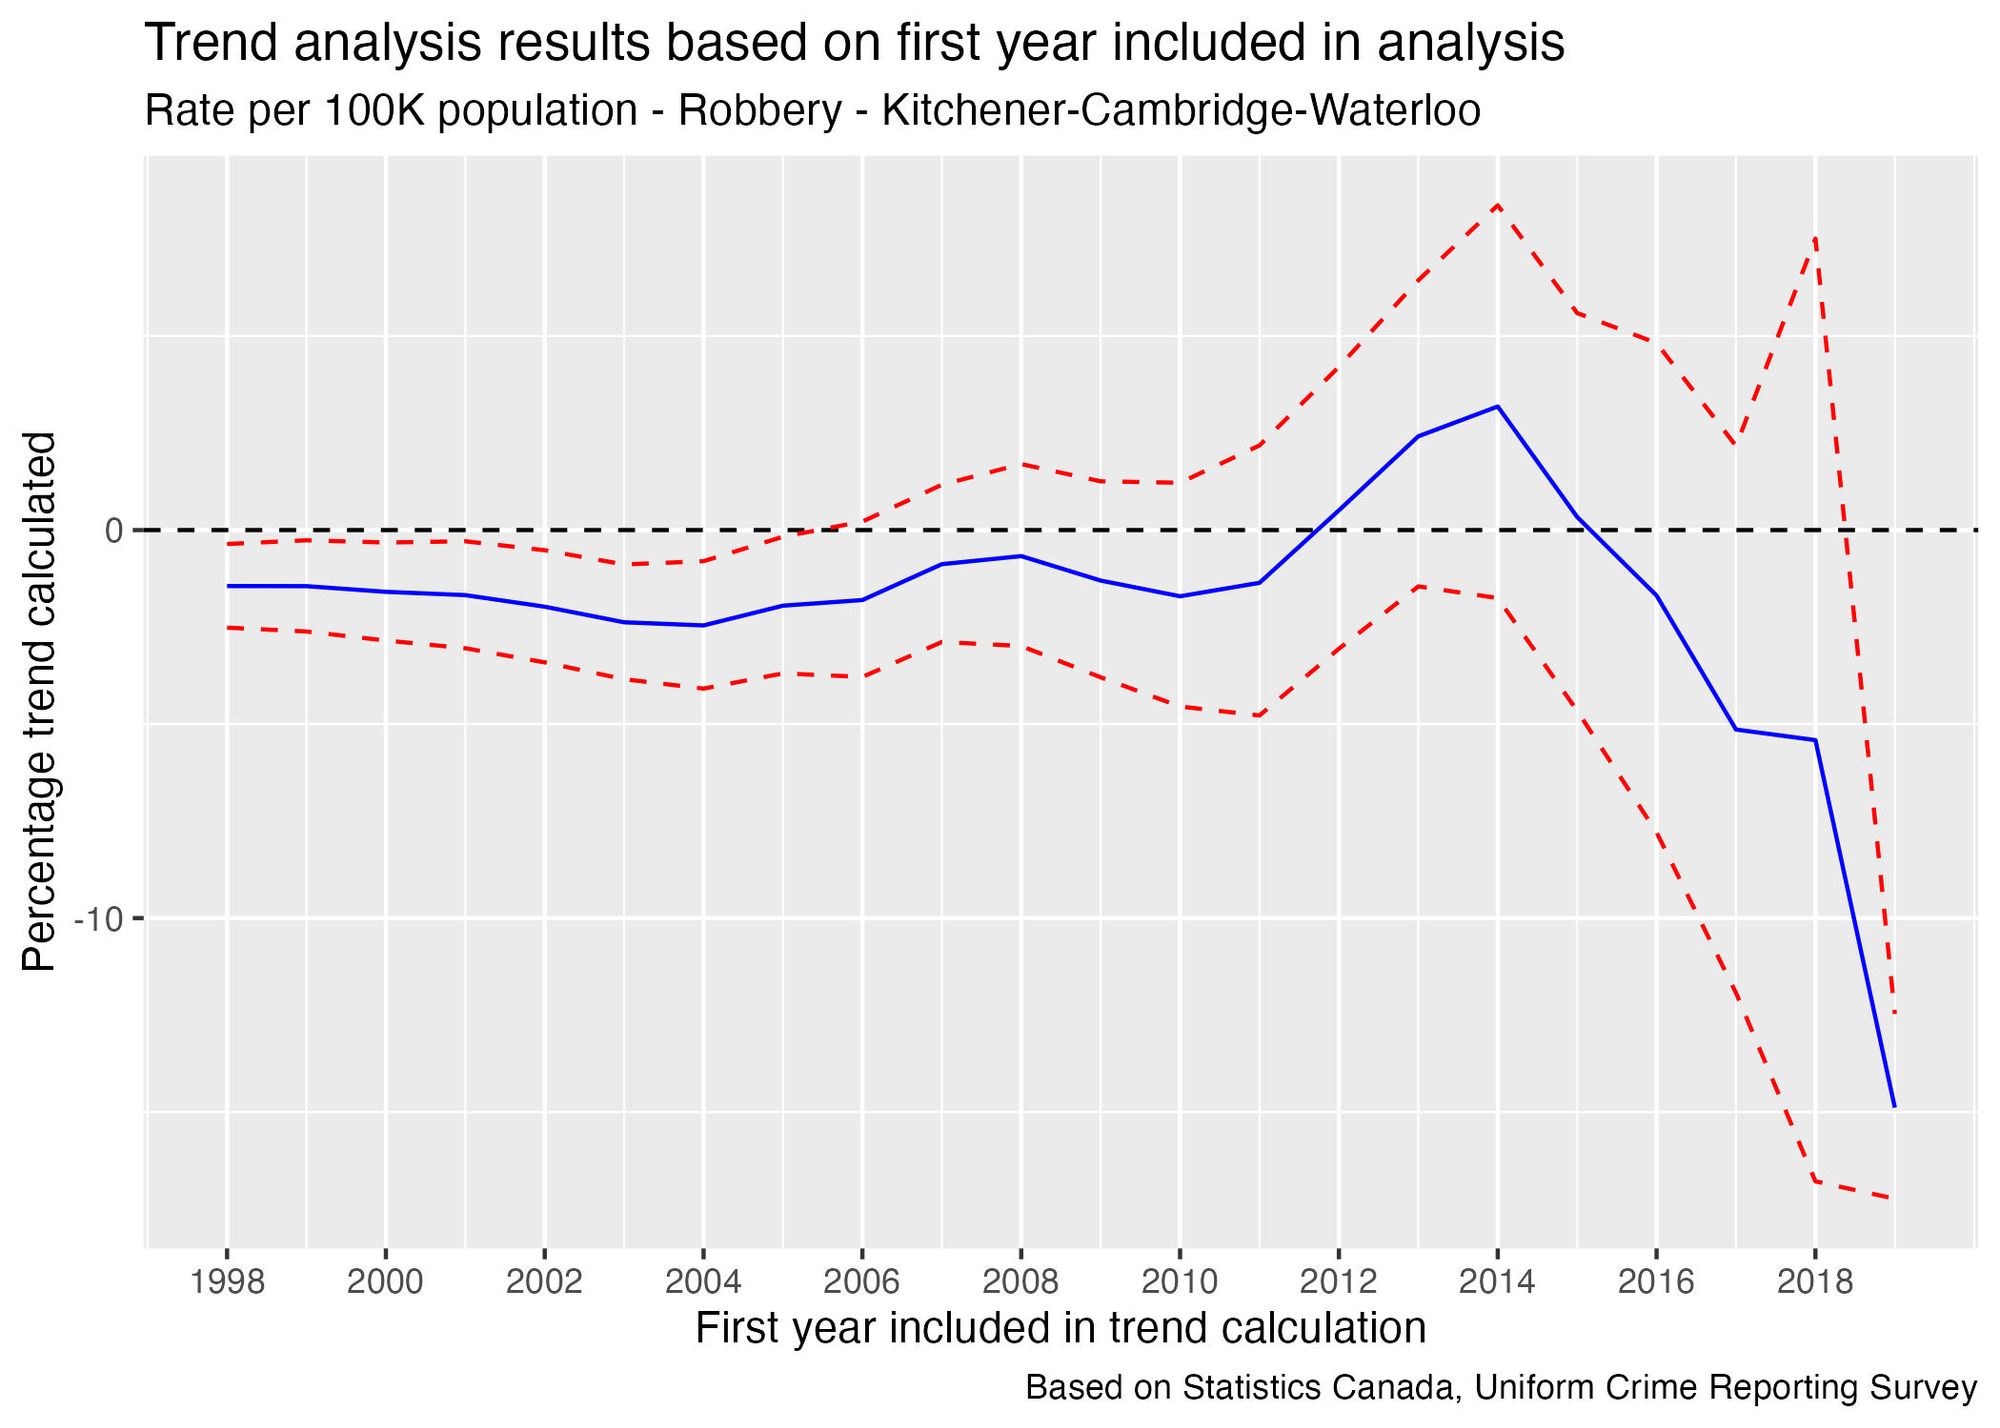 A graph of “Trend analysis results based on first year included in analysis” for “Rate per 100K population – Robbey – Kitchener-Cambridge-Waterloo. It shows the “Percentage trend calculated” for each year between 1998 and 2019, inclusive. A solid blue line is surrounded by two dashed red lines. The blue line starts off just below 0 in 1998; in 2011 it starts increasing to a level of around 3% by 2014 but then drops sharply after that. Further description is provided in the main article.